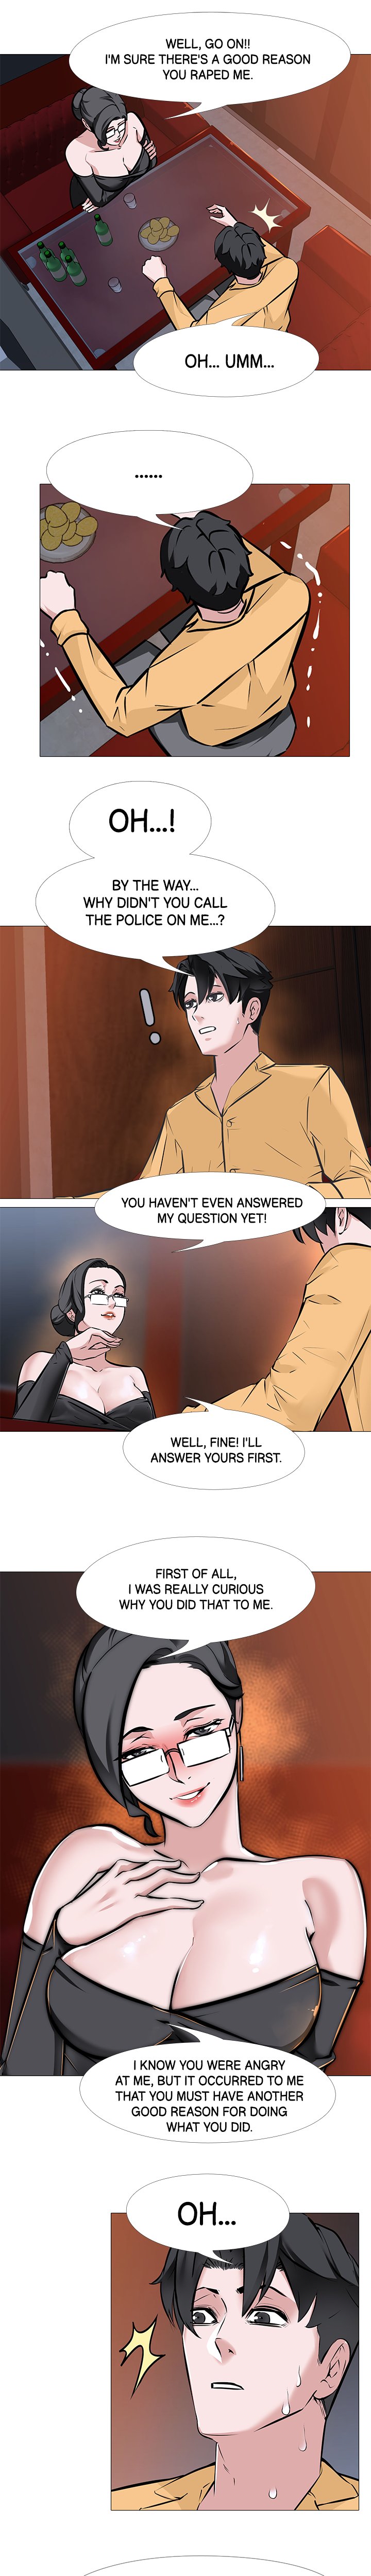 WIFE GAME - Chapter 8 Page 6